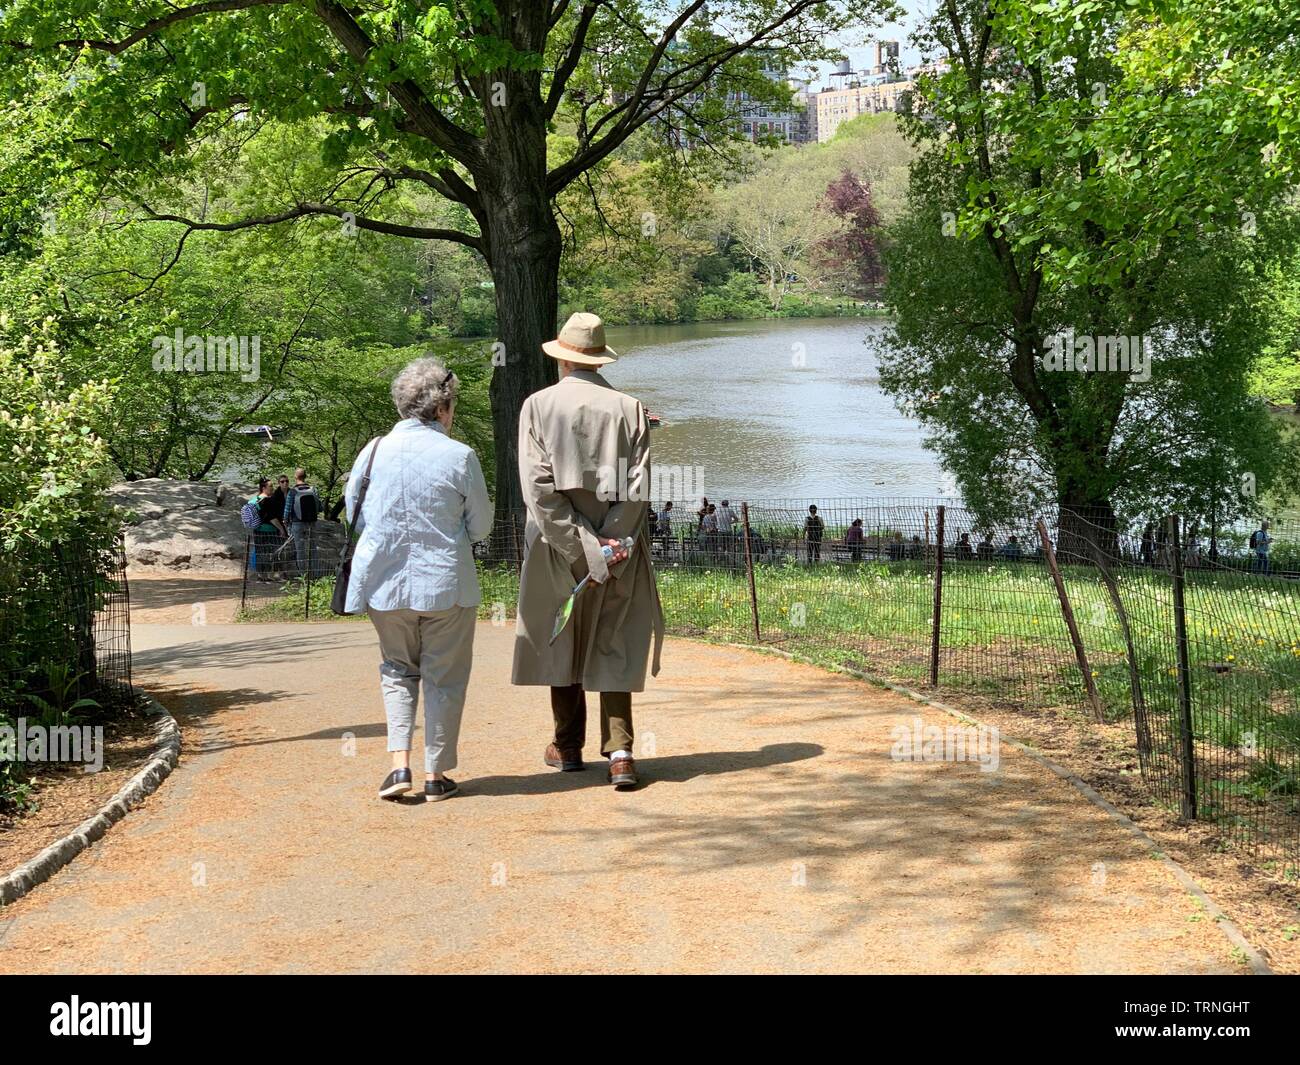 Central park park view in new york Foto Stock